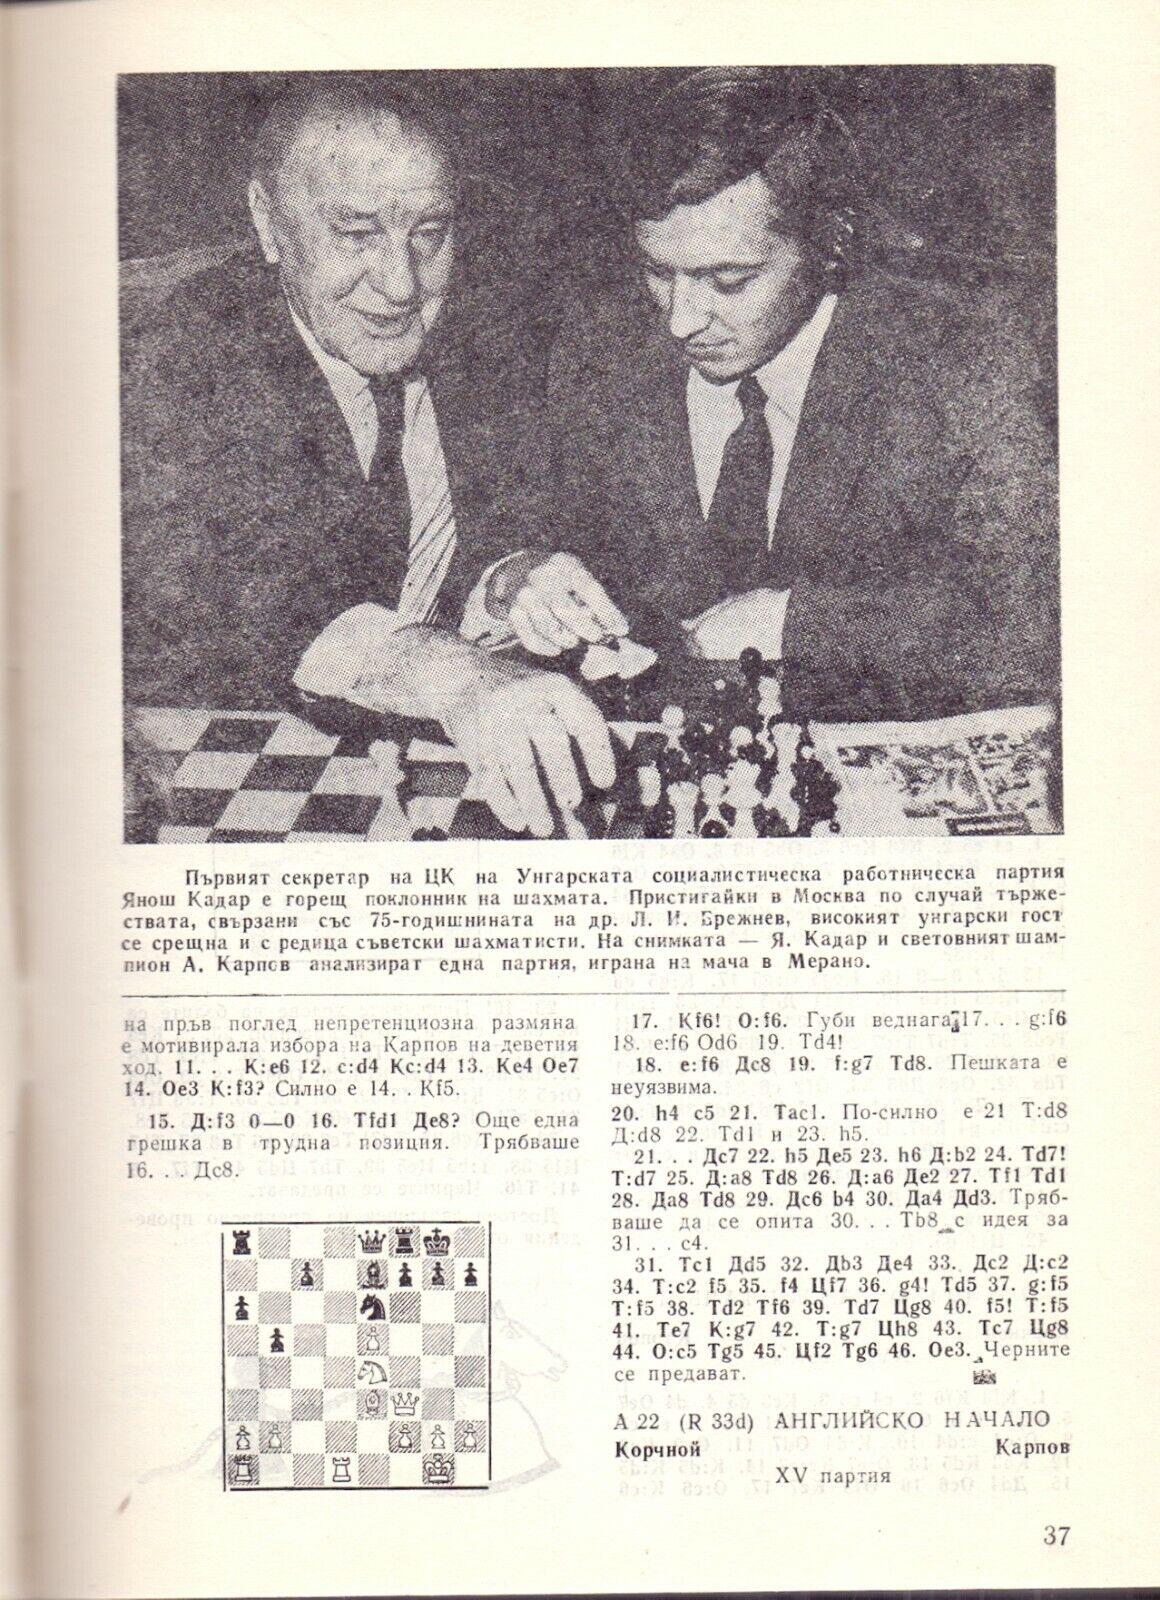 10977.Bulgarian chess magazine «Chess thought». Annual sets 1981, 1982, 1985, 1986